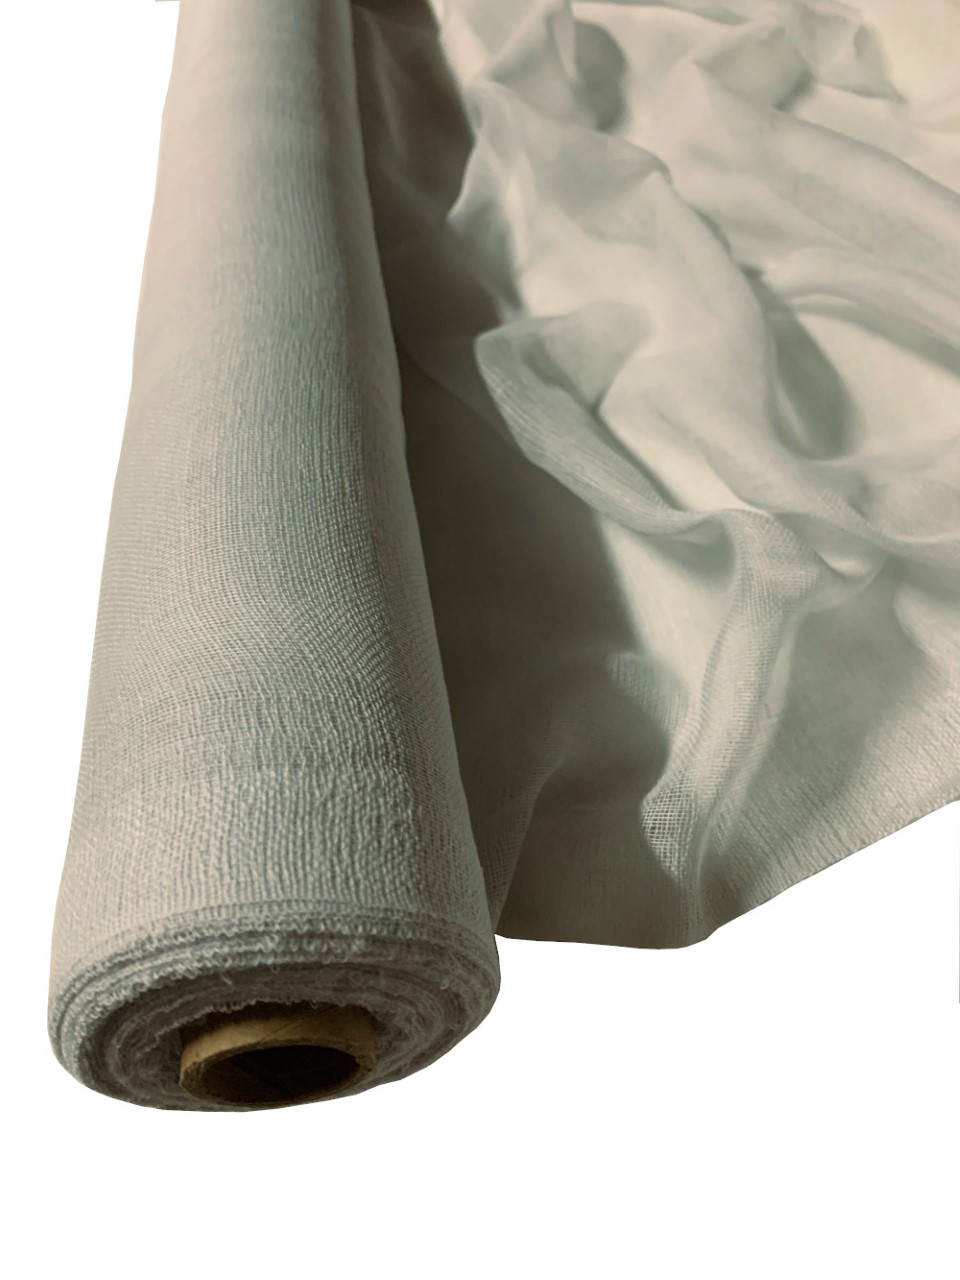 36" Light Grey Cheesecloth 100 Foot Roll - 100% Cotton